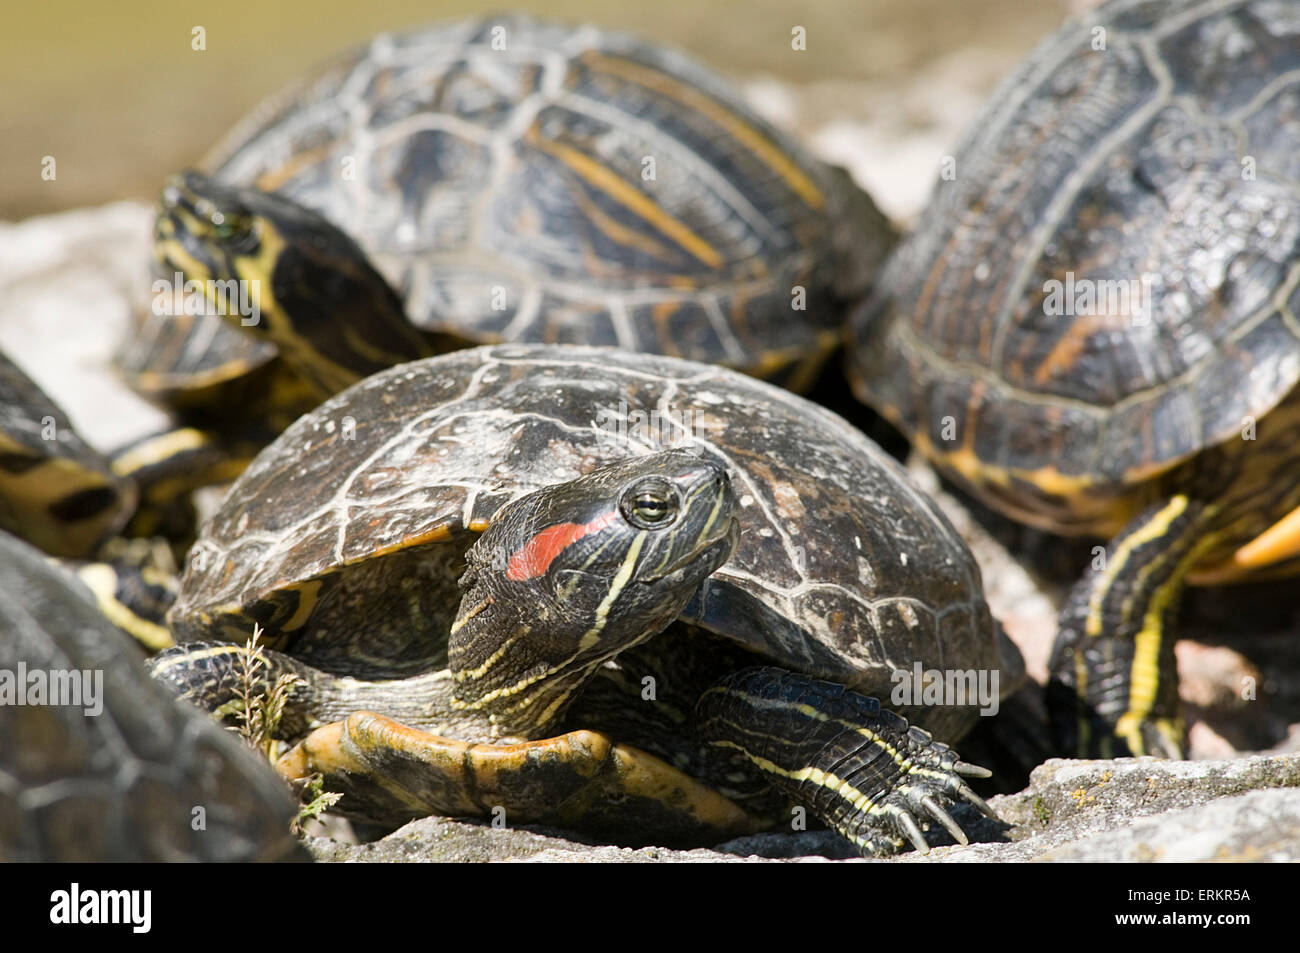 red eared terrapin terrapins basking warming up in the sun cold blooded  Emydidae sunbathing invasive species in pond wild escap Stock Photo